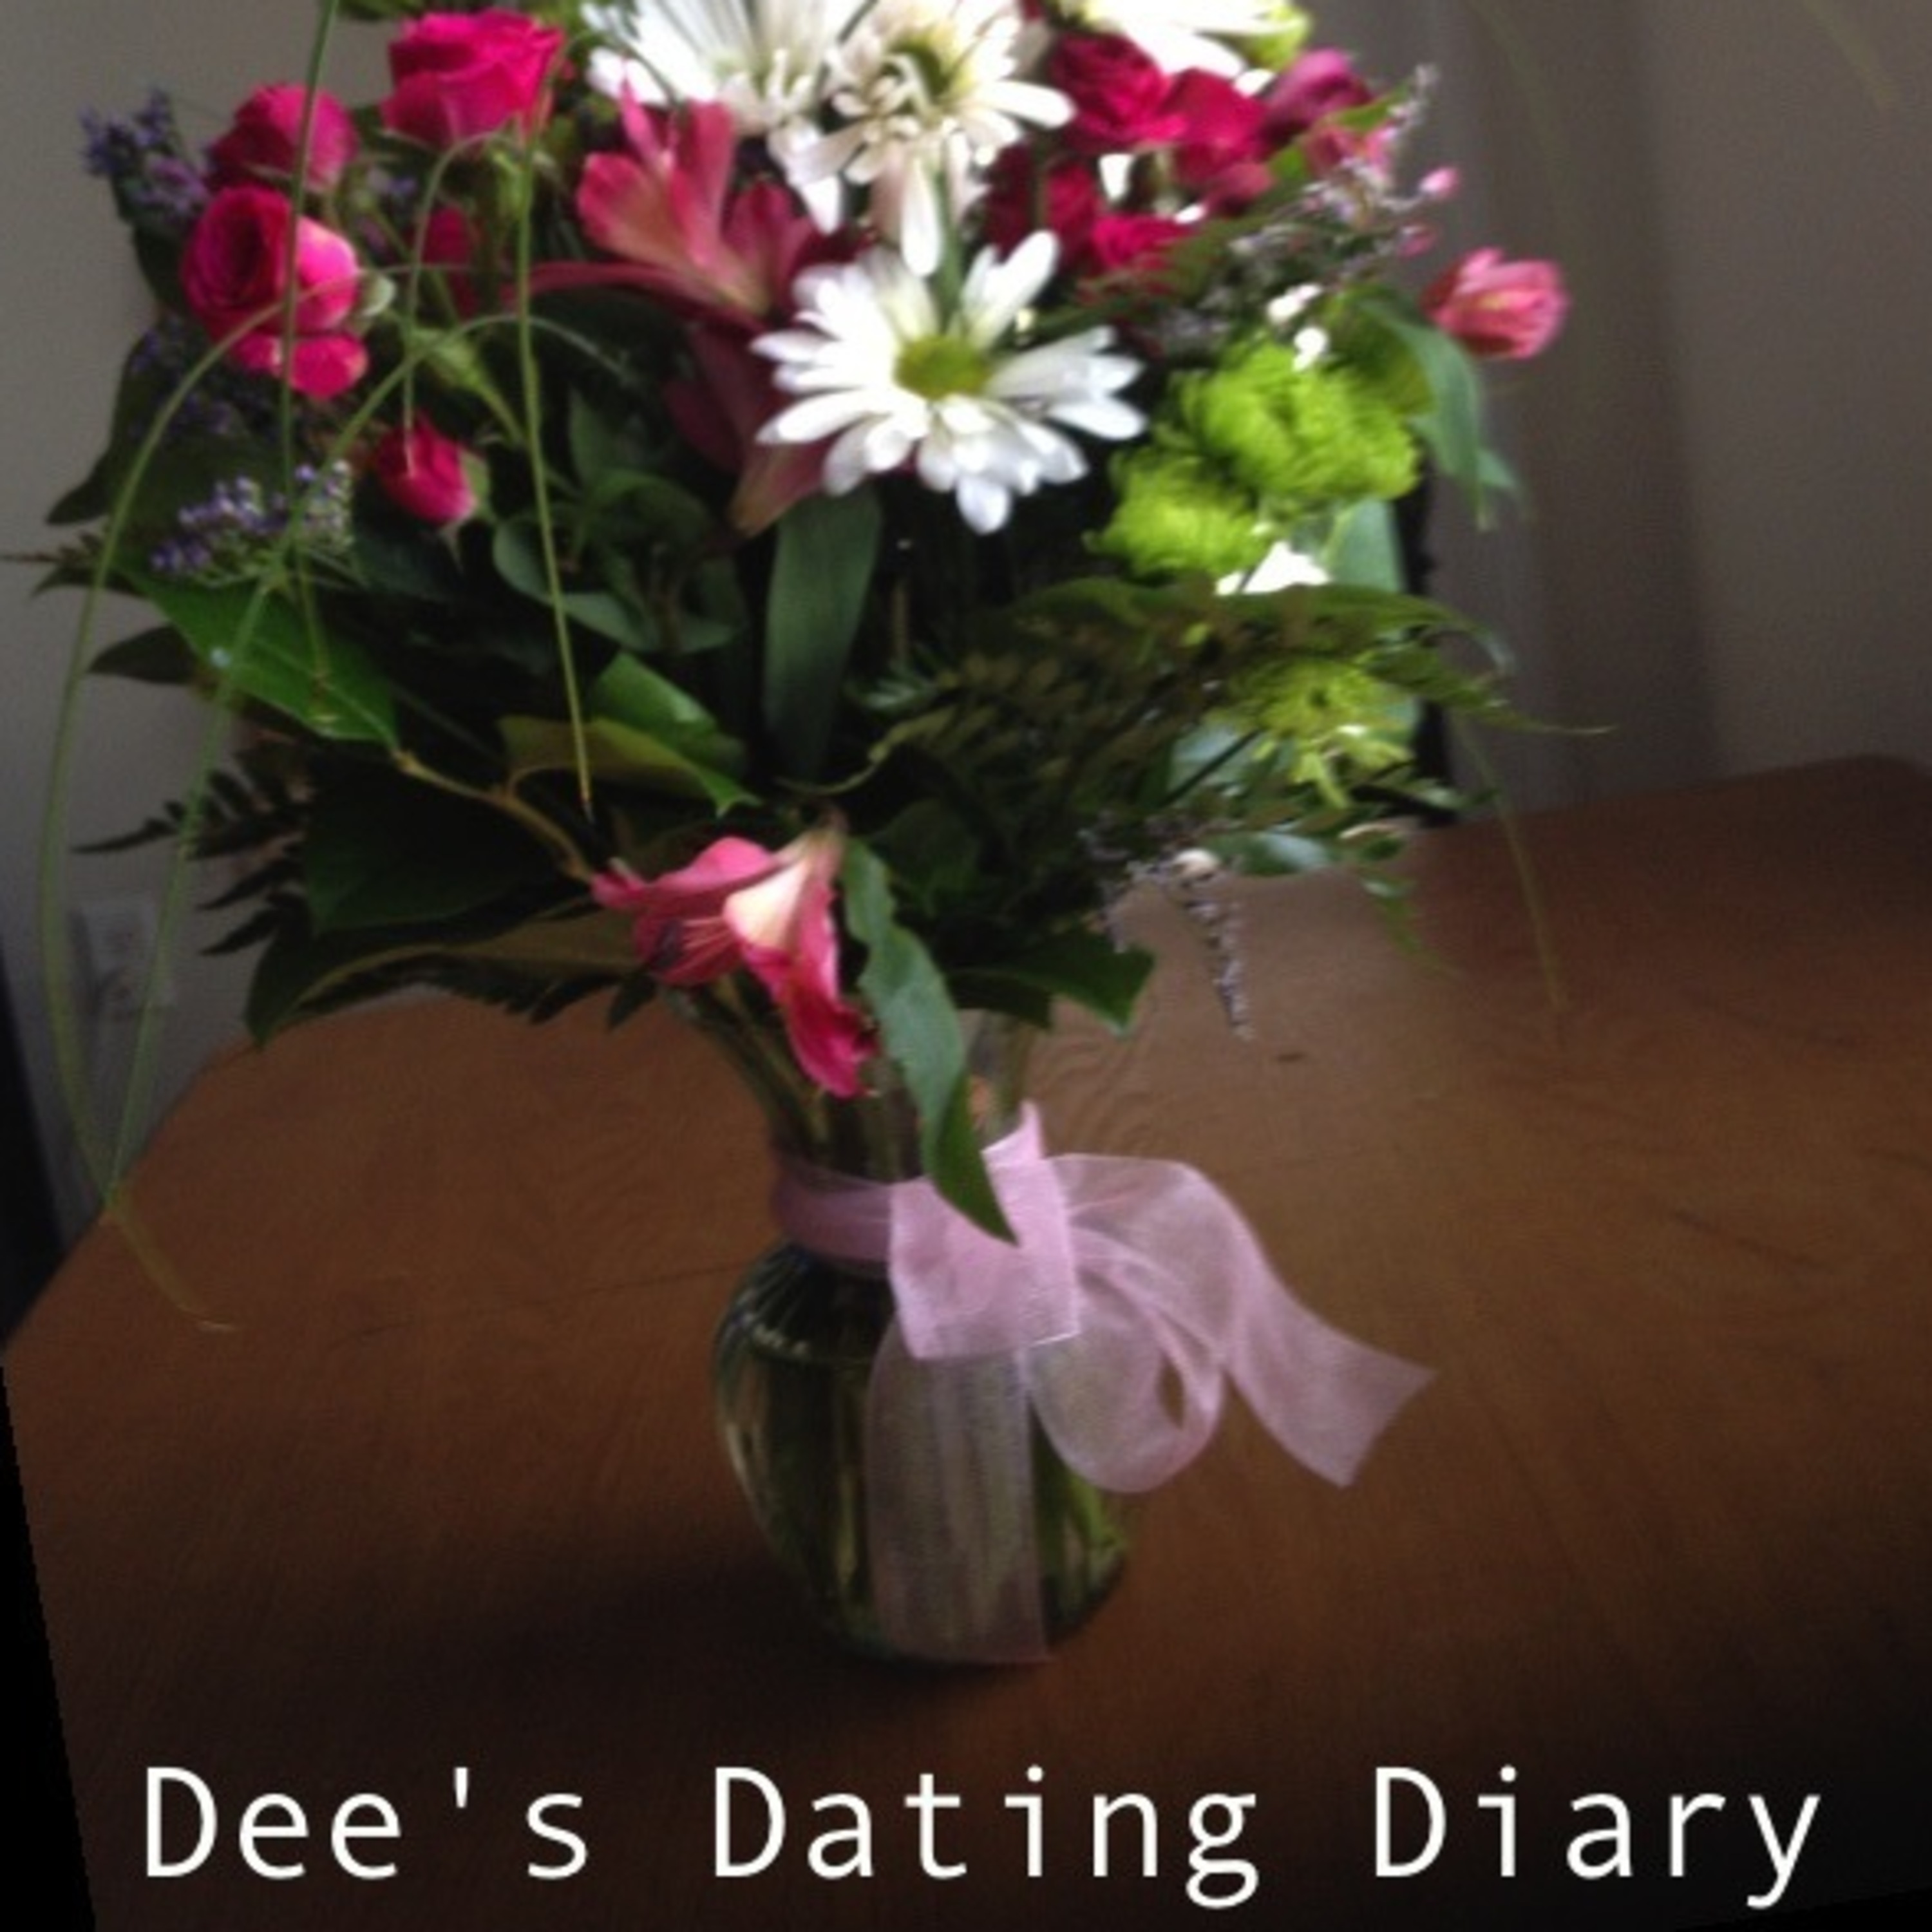 Dee's Dating Diary